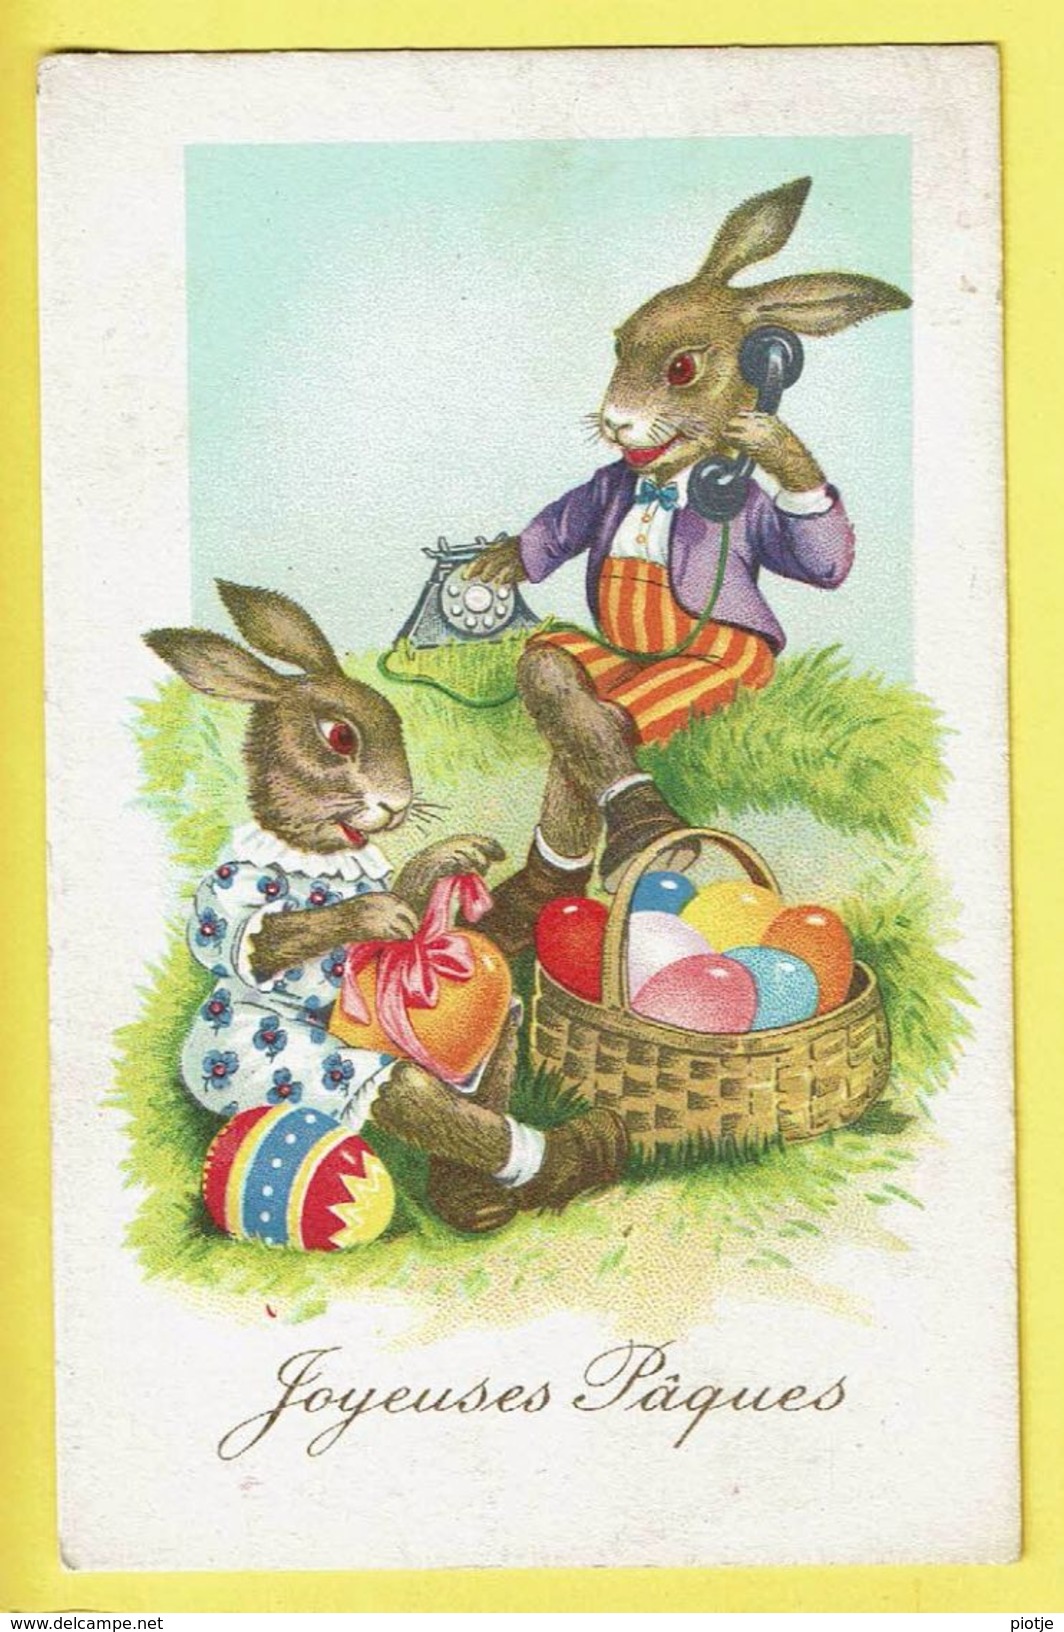 * Pasen - Paques - Easter (Fantaisie - Fantasy) * (Import Nr 7689-1) Joyeuses Paques, Telephone, Lapin, Bunny, Rabbit - Easter